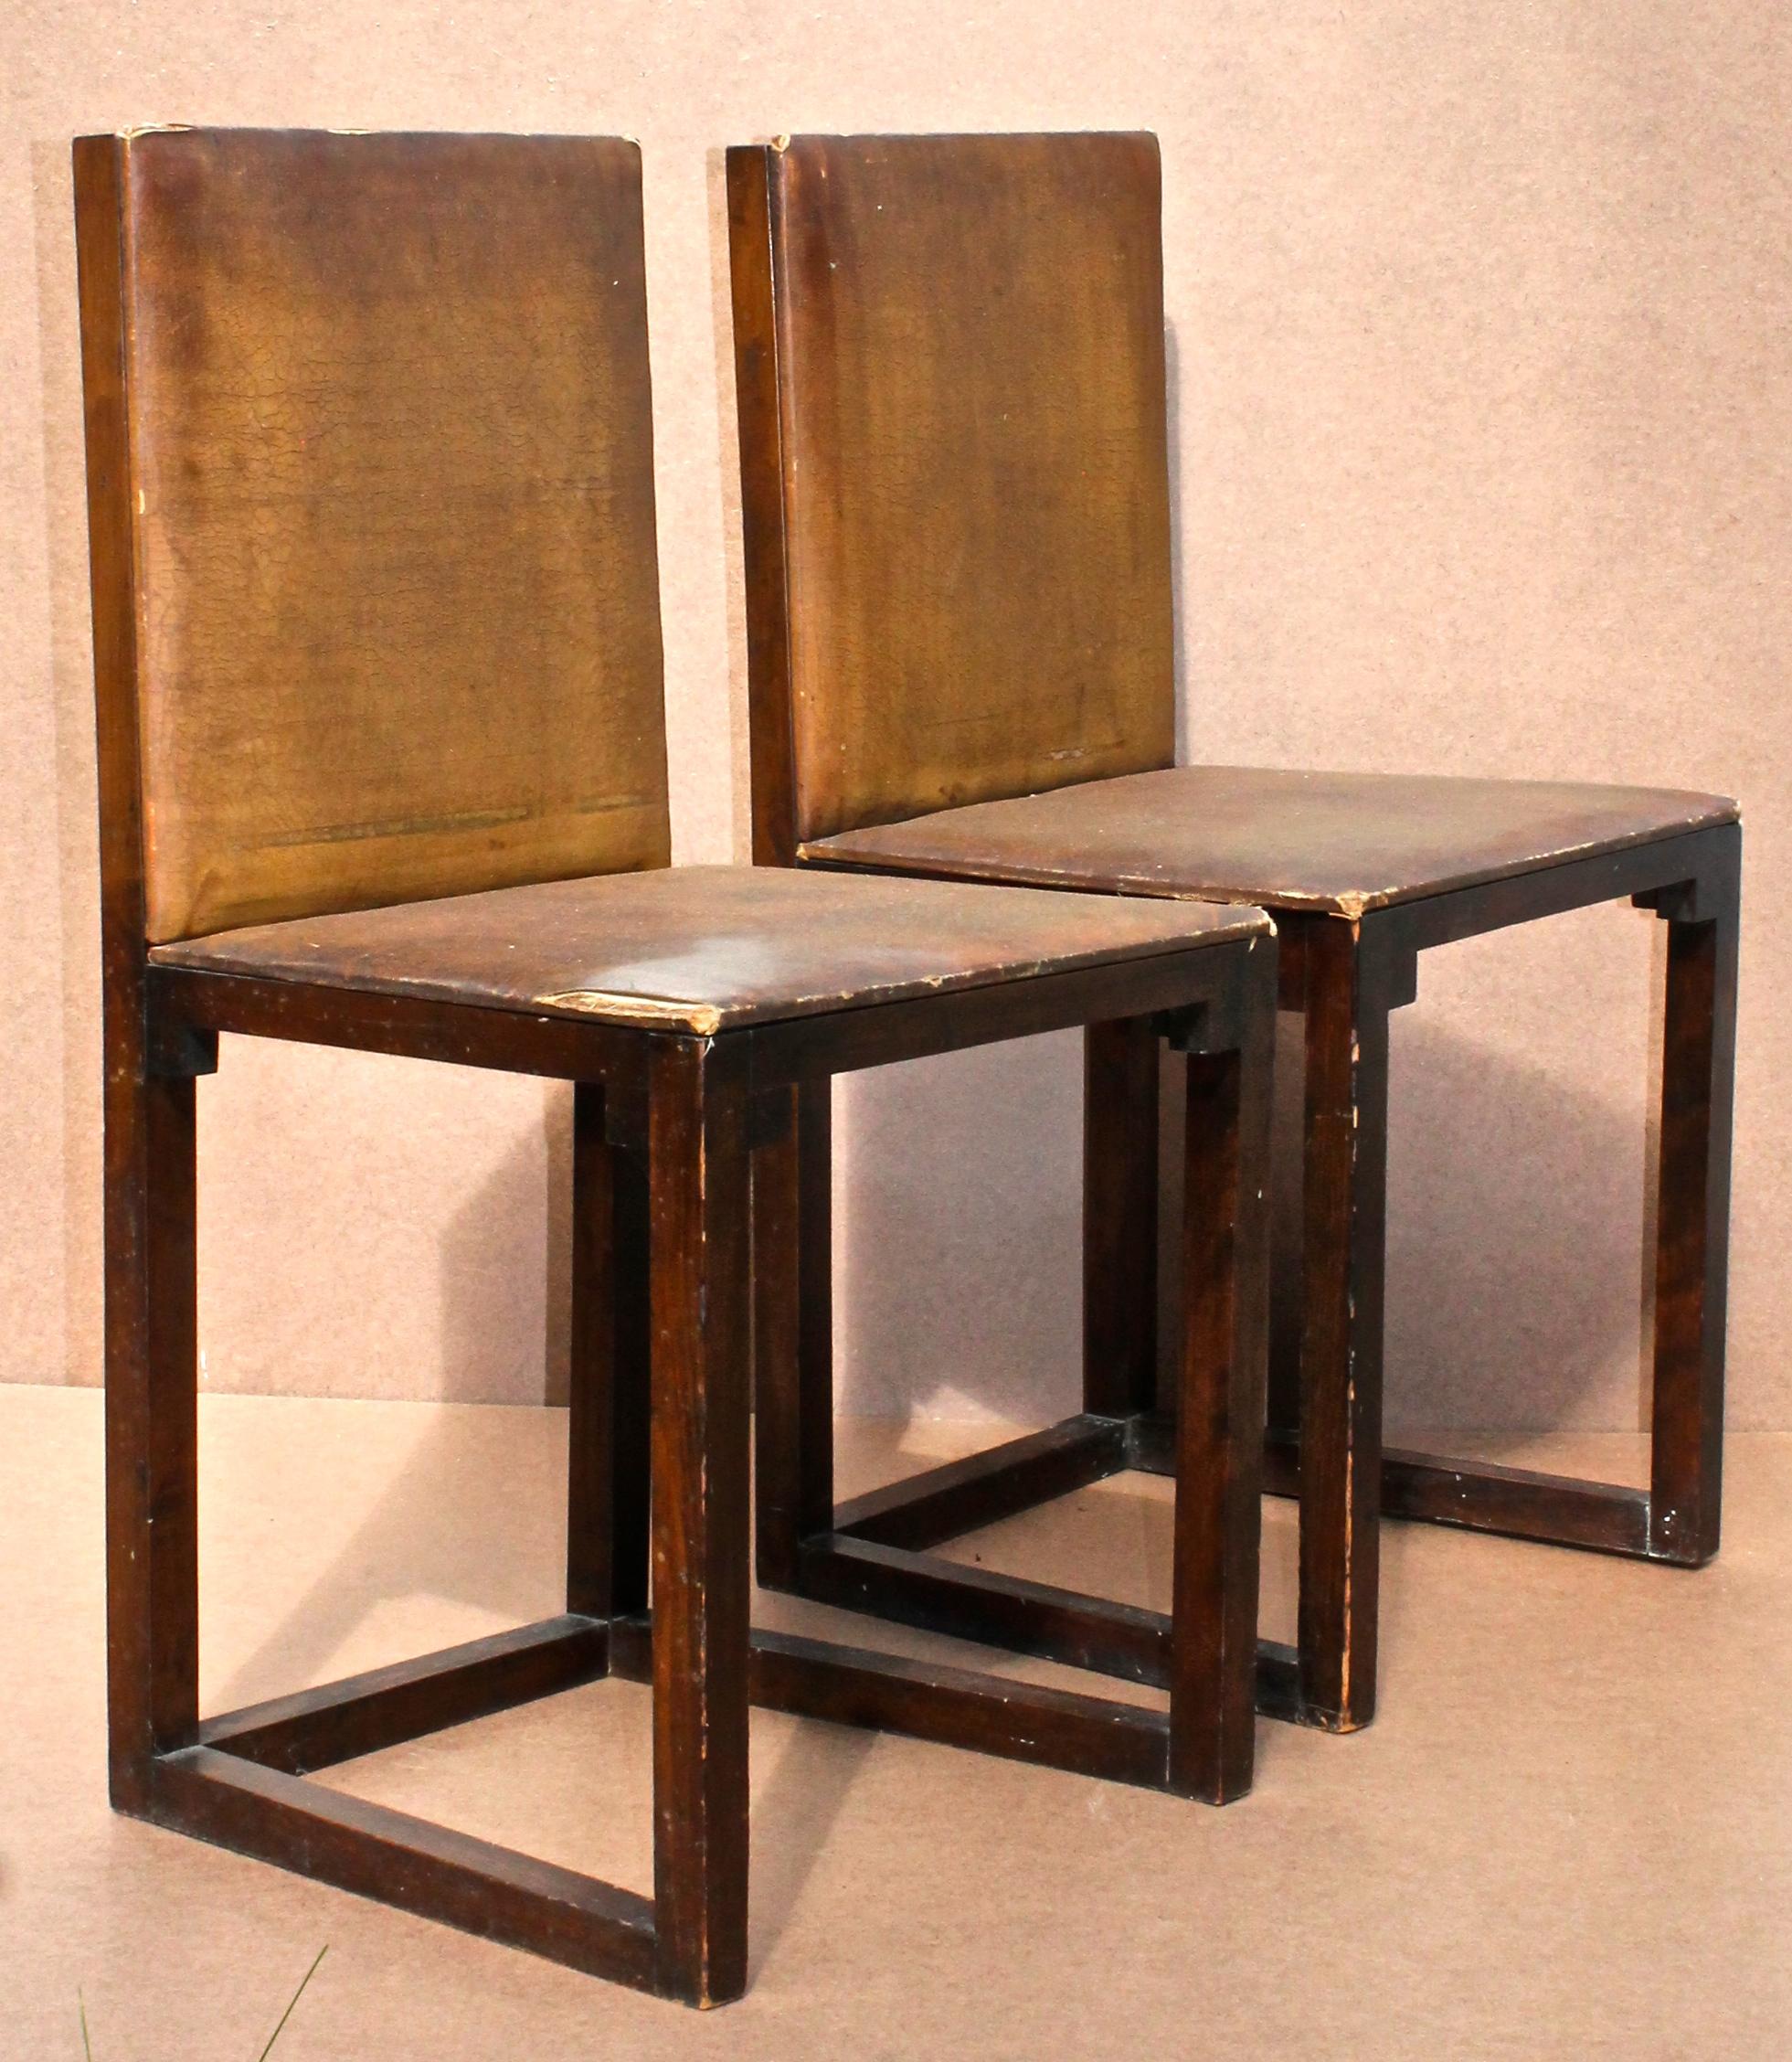 A rare and important pair of rationally designed square section wood chairs with 'oilcloth' upholstered seats/backs. The handling of the corner structure with small cubes is an especially innovative solution.